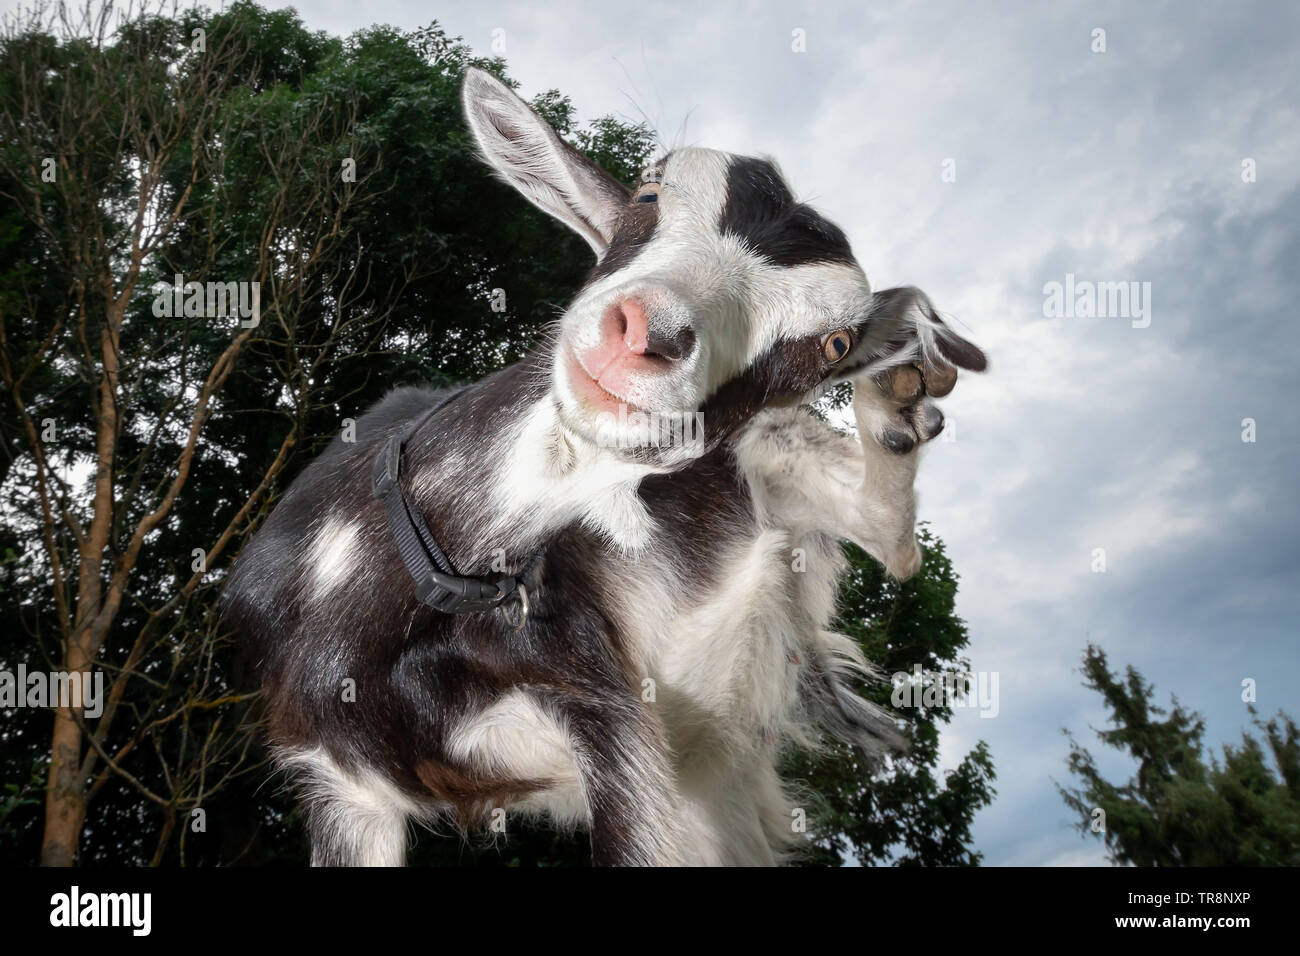 Funny goat raise his leg and rub her ear Stock Photo